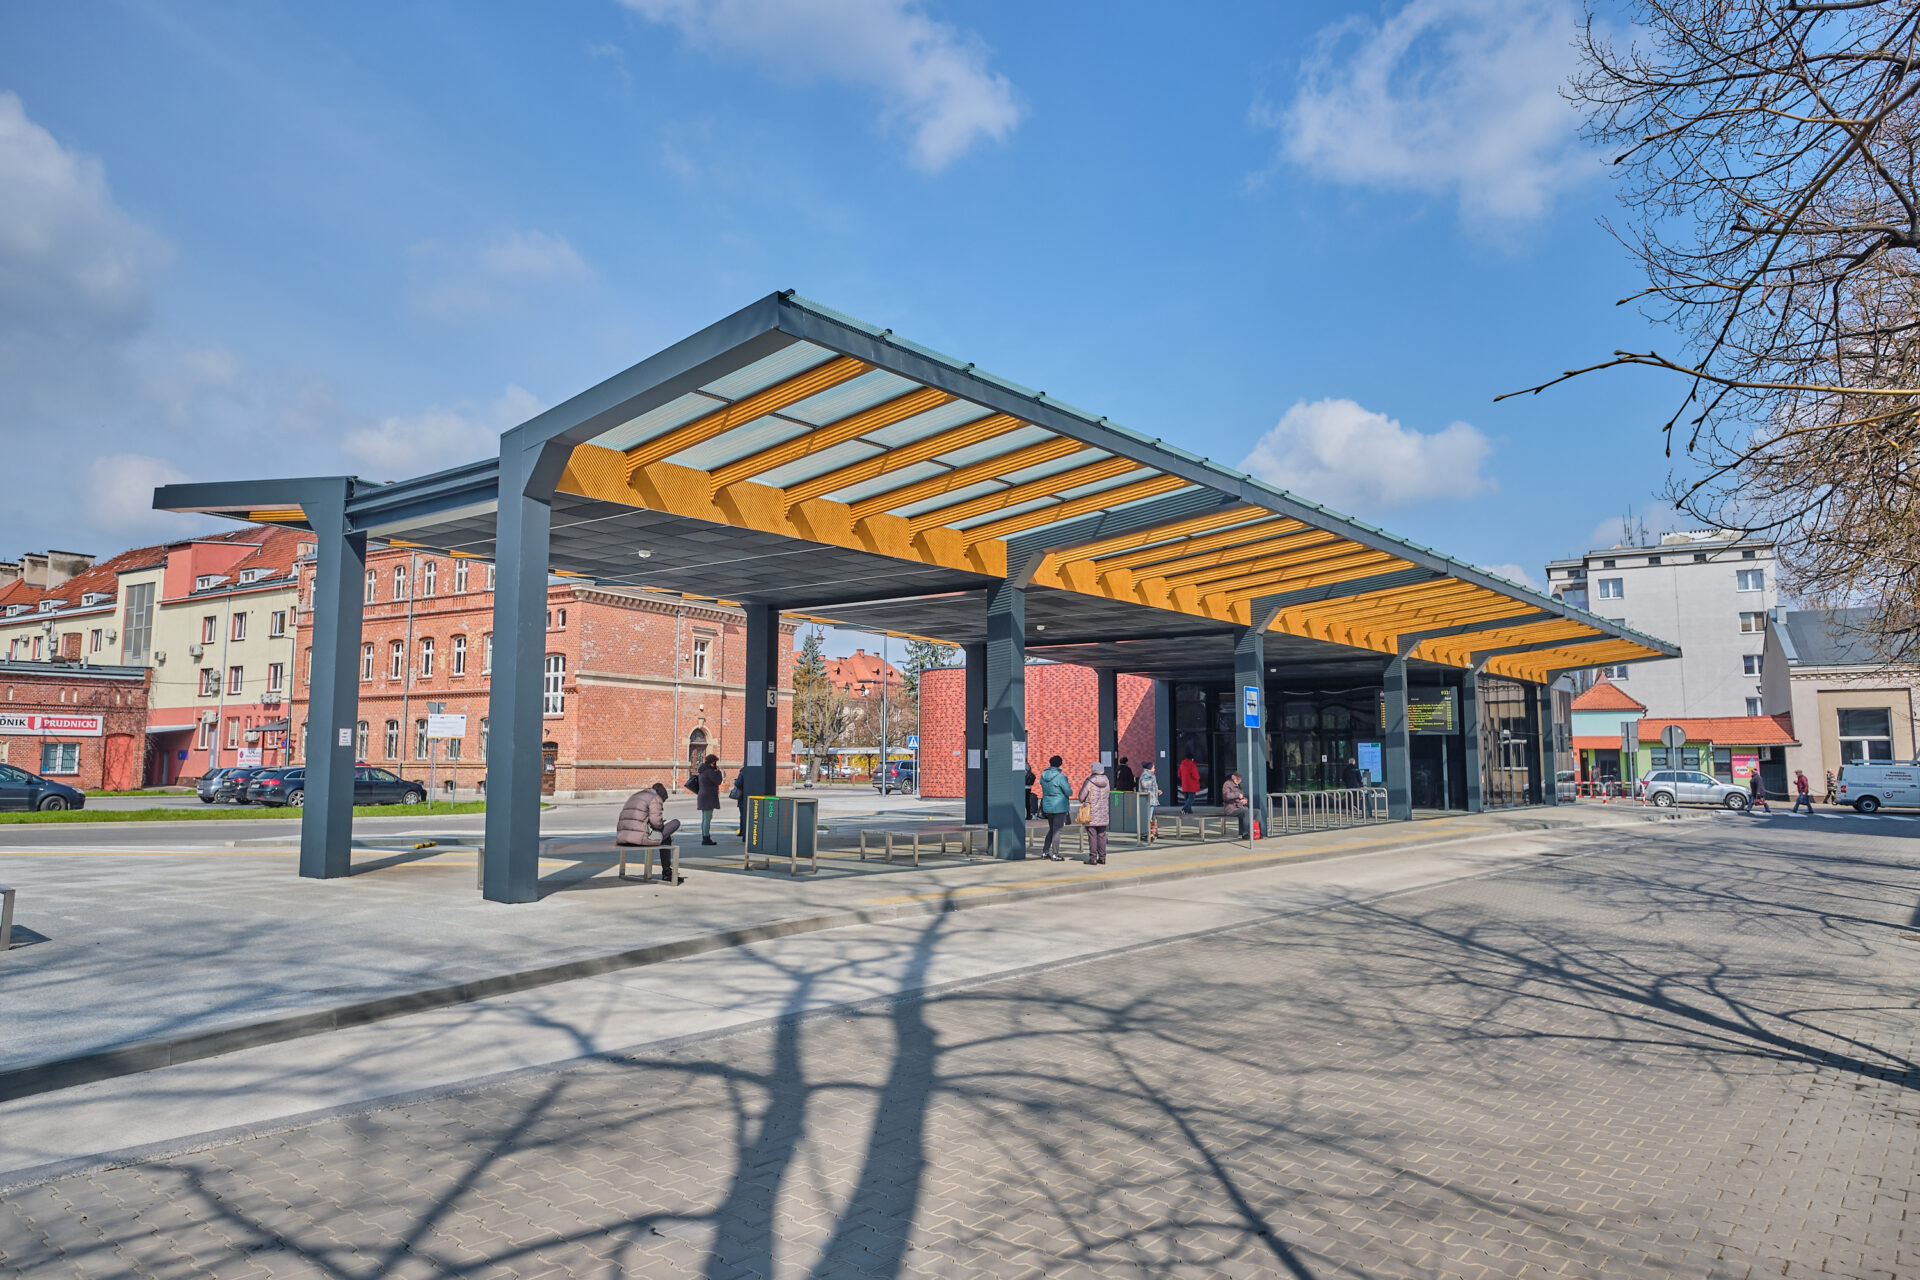 Construction of the bus station in Prudnik